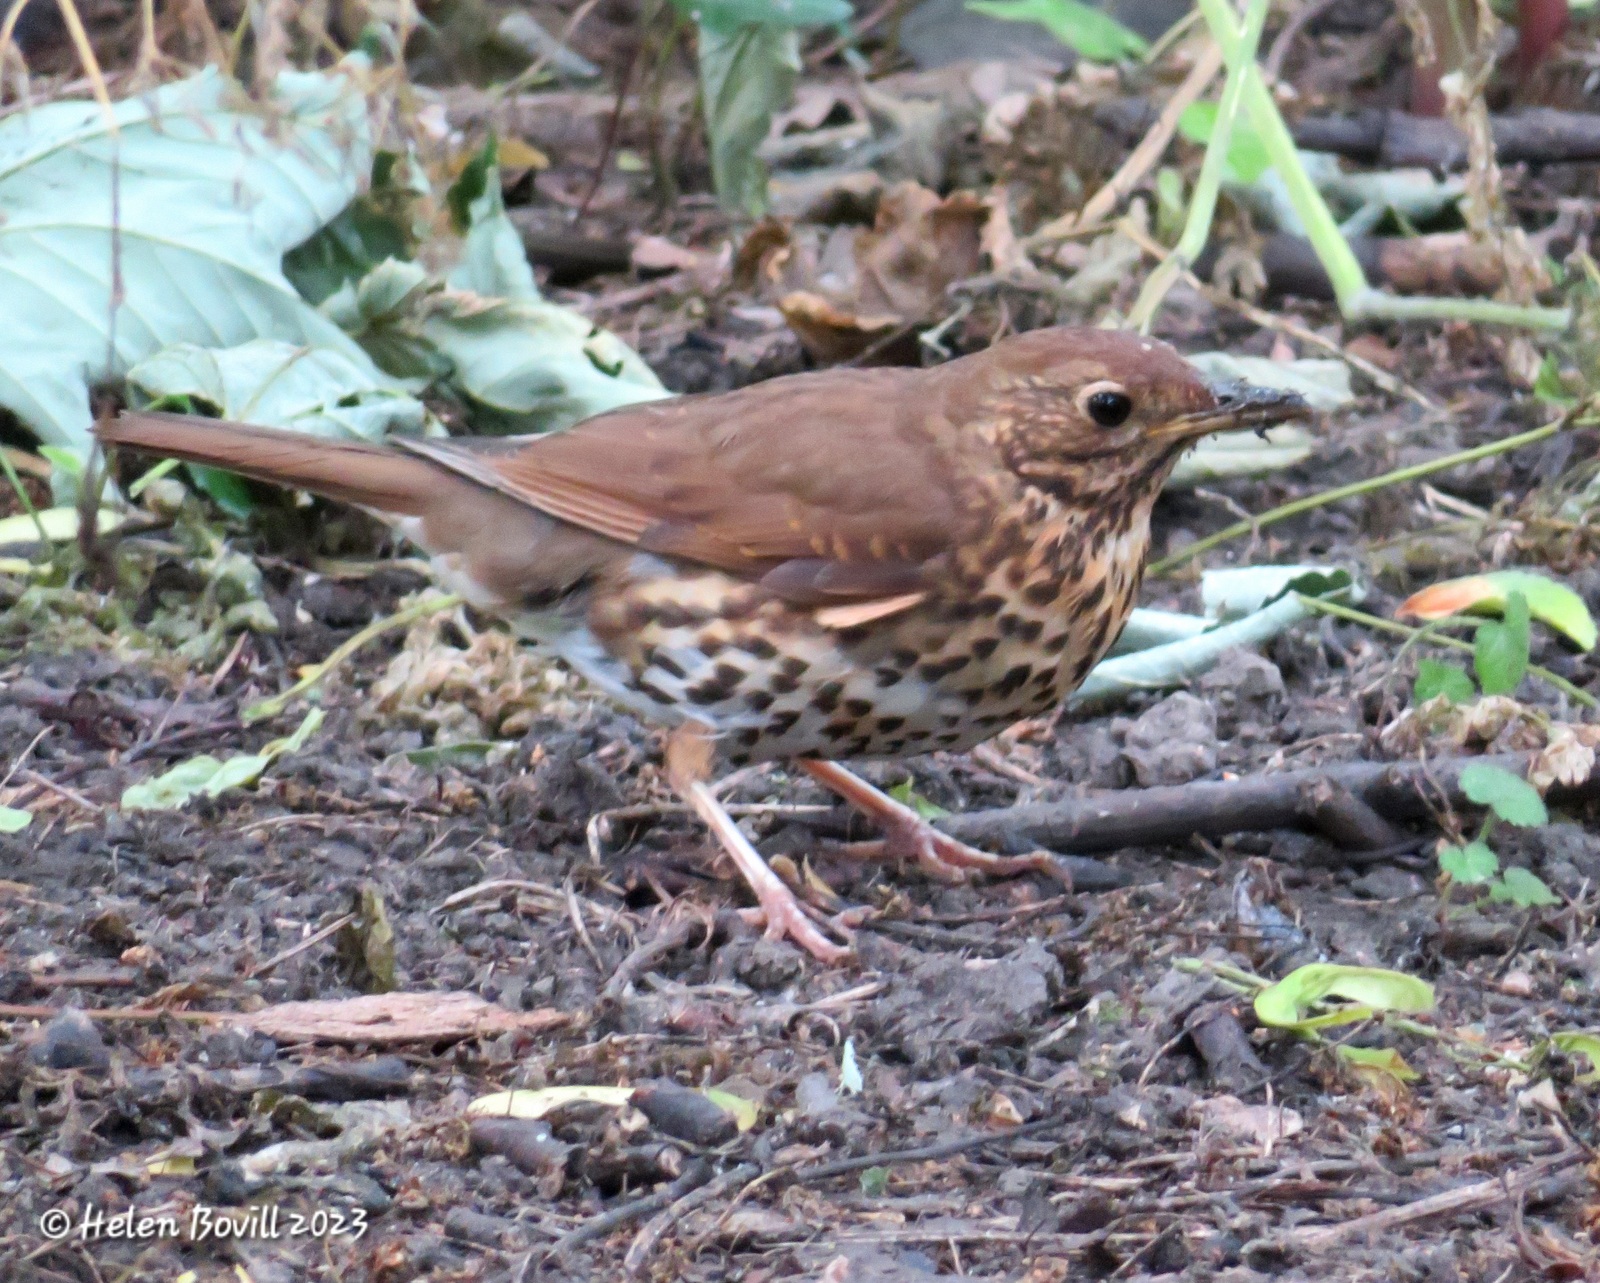 A Song Thrush foraging on the ground